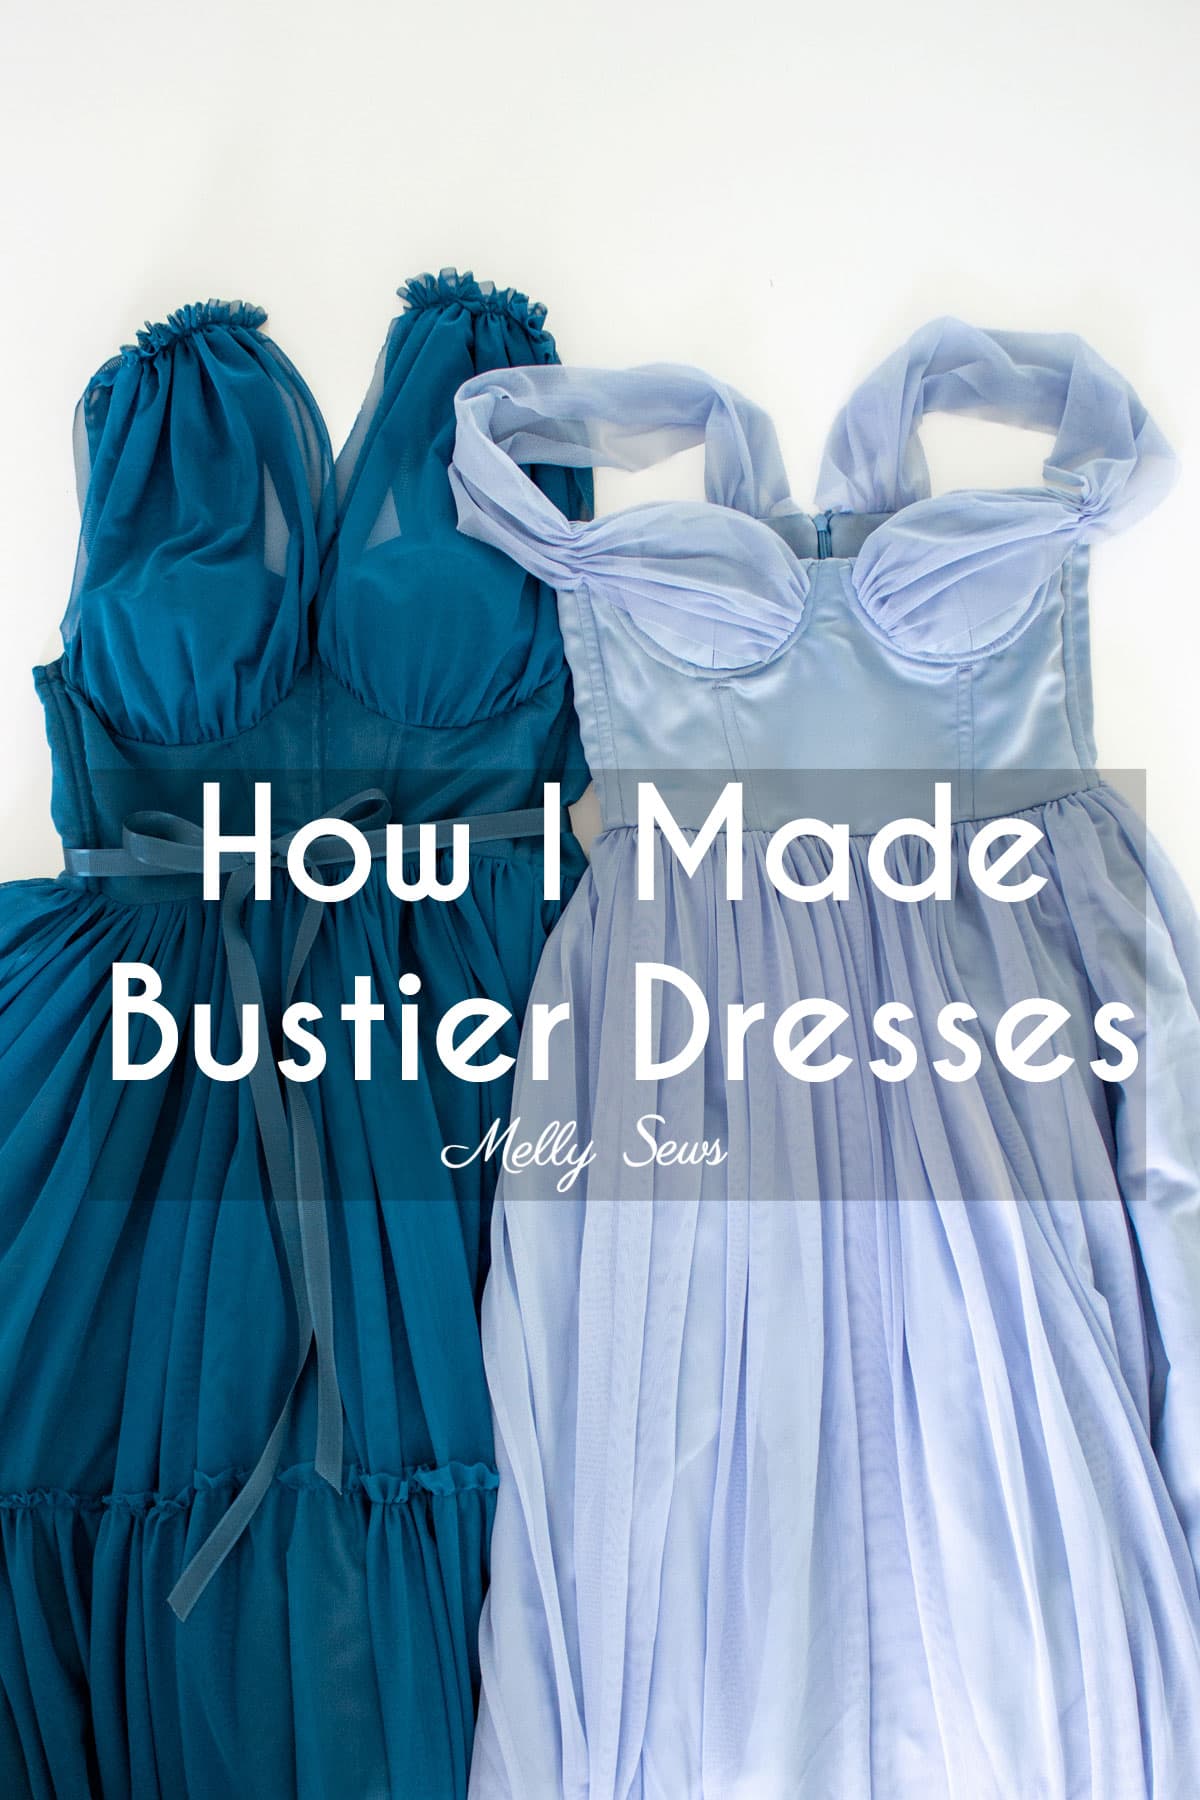 BRA CUPS: How to Fix and Sew Bra cups to a Bustier Blouse/ Dress